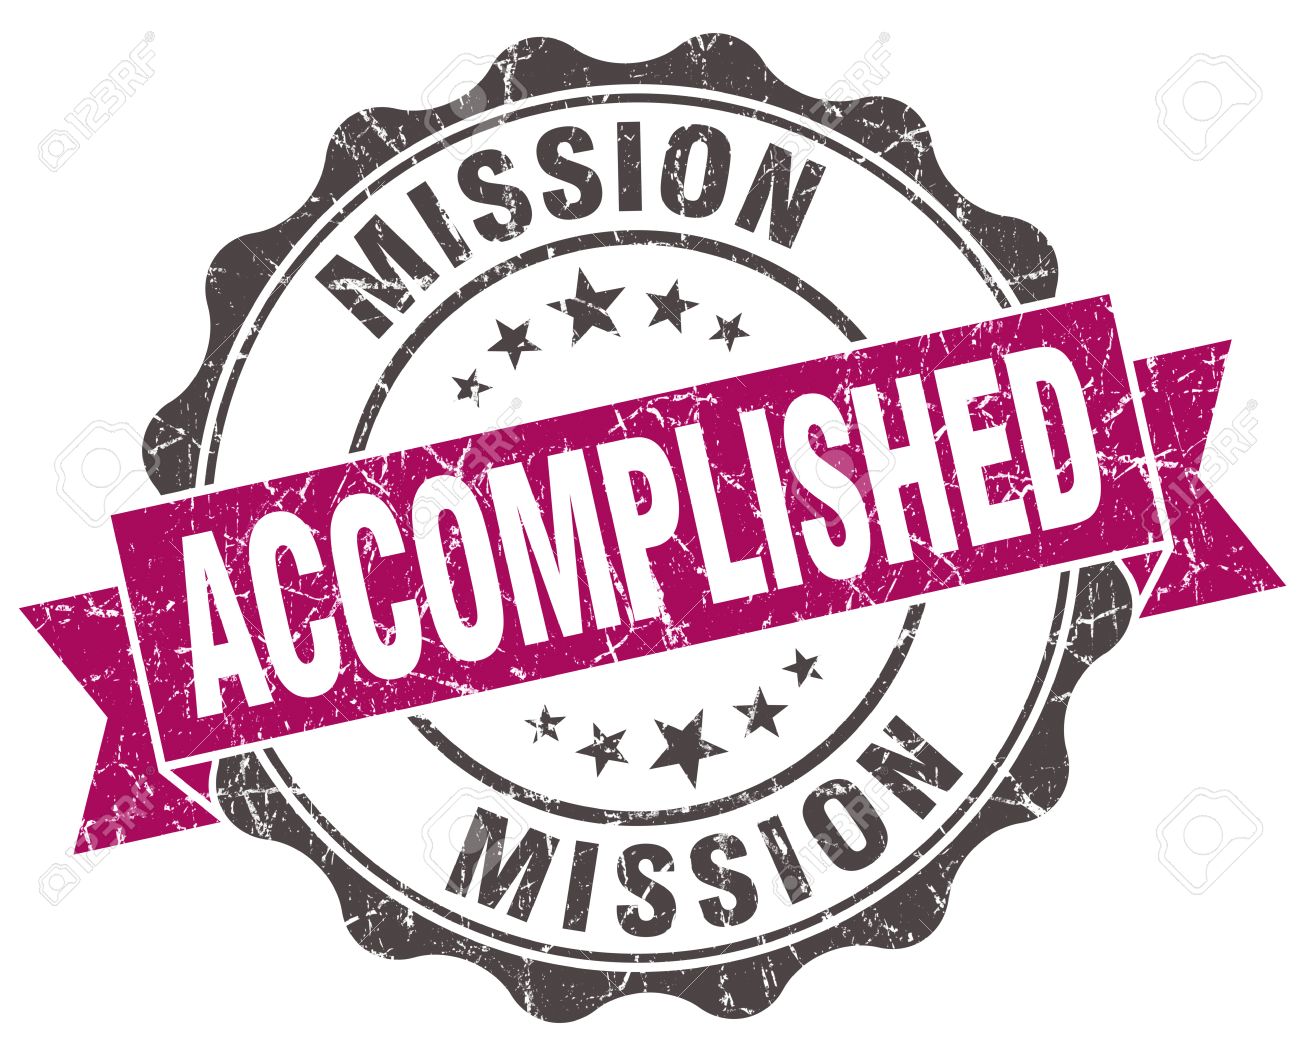 36523616-mission-accomplished-grunge-violet-seal-isolated-on-white-Stock-Photo.jpg